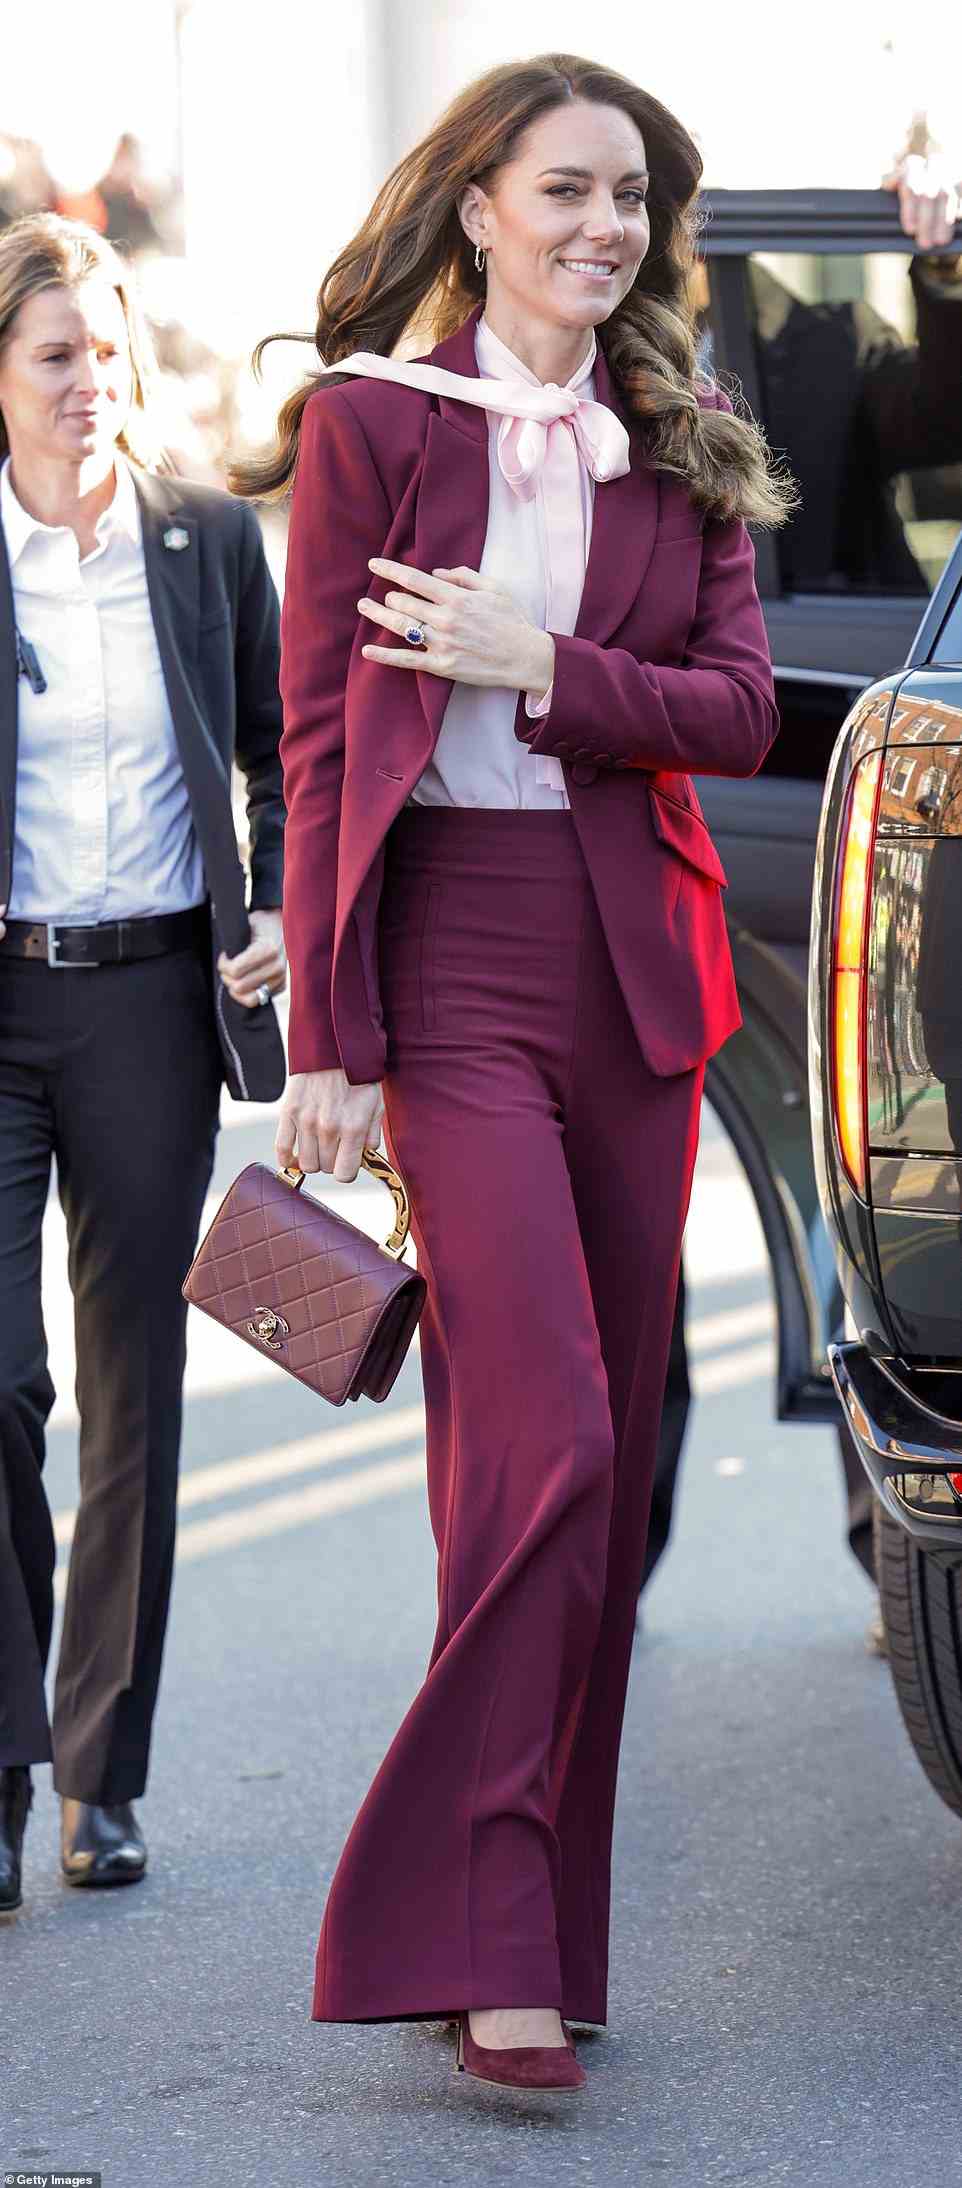 Kate Middleton continued her tour of the US in a chic $2,724 Alexander McQueen burgundy pants suit on Thursday morning, which she accessorized with a stunning $4,664 Chanel maroon and gold enamel purse